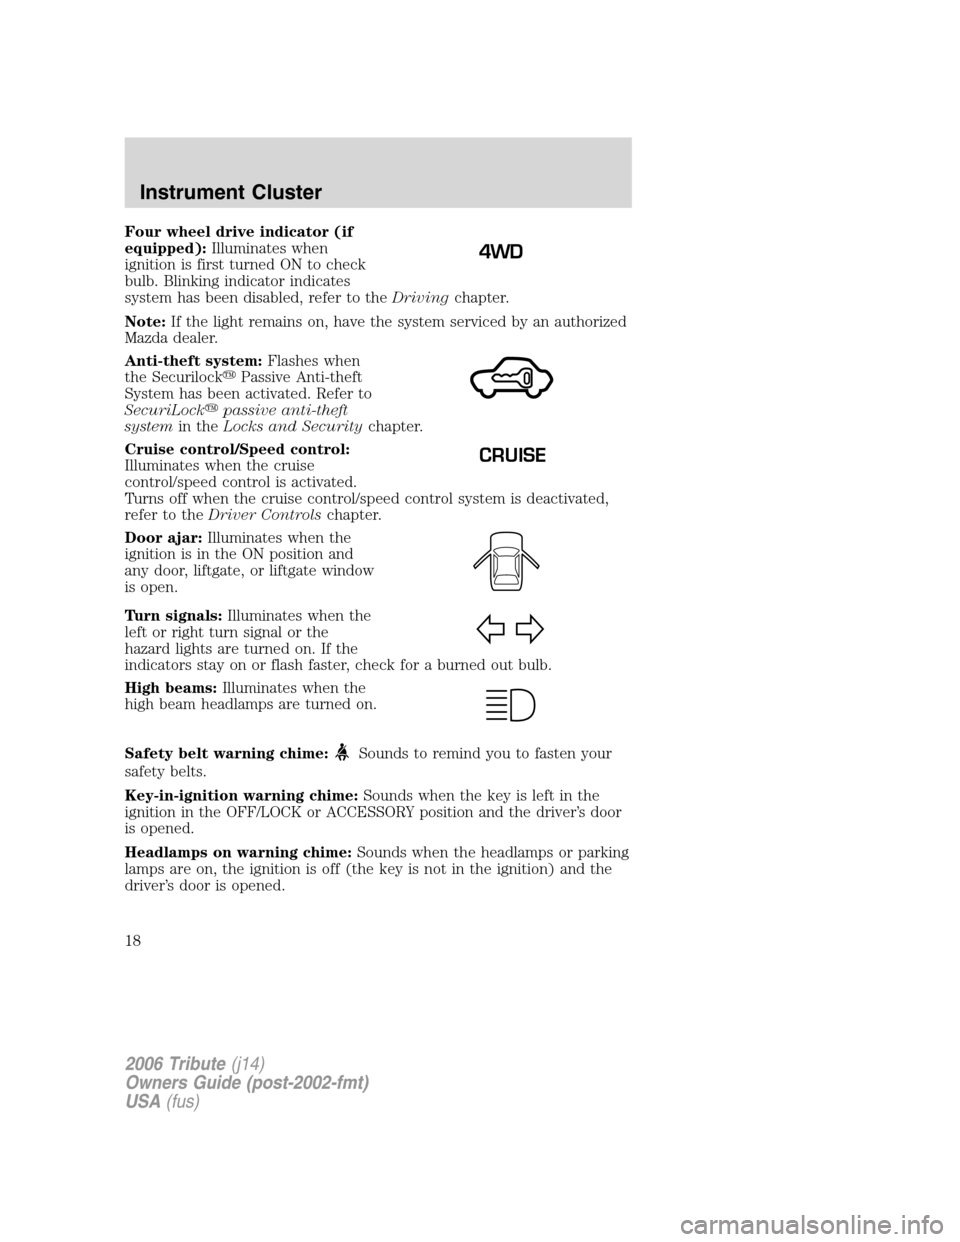 MAZDA MODEL TRIBUTE 2006  Owners Manual (in English) Four wheel drive indicator (if
equipped):Illuminates when
ignition is first turned ON to check
bulb. Blinking indicator indicates
system has been disabled, refer to theDrivingchapter.
Note:If the ligh